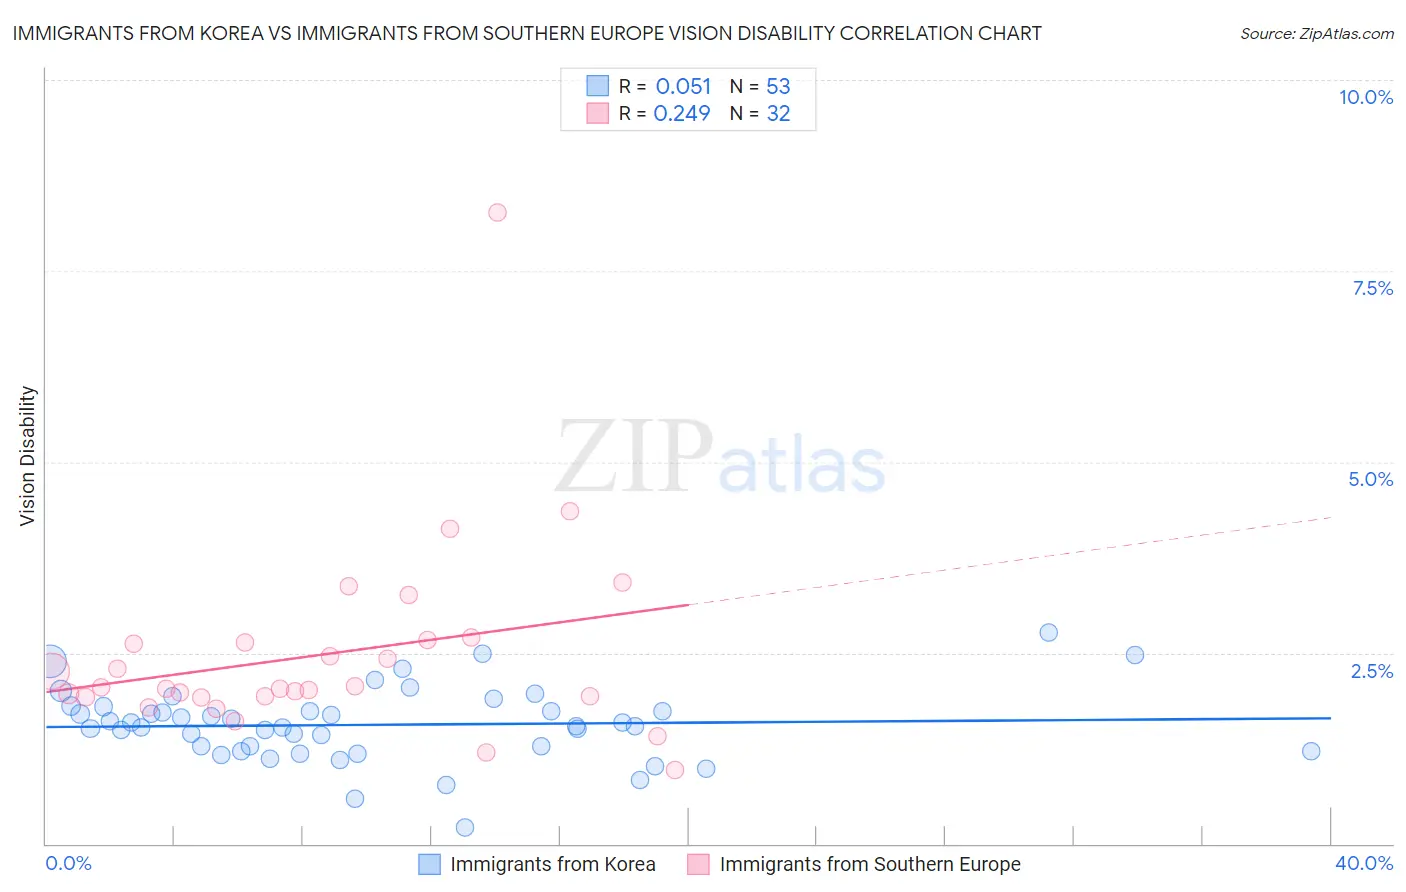 Immigrants from Korea vs Immigrants from Southern Europe Vision Disability